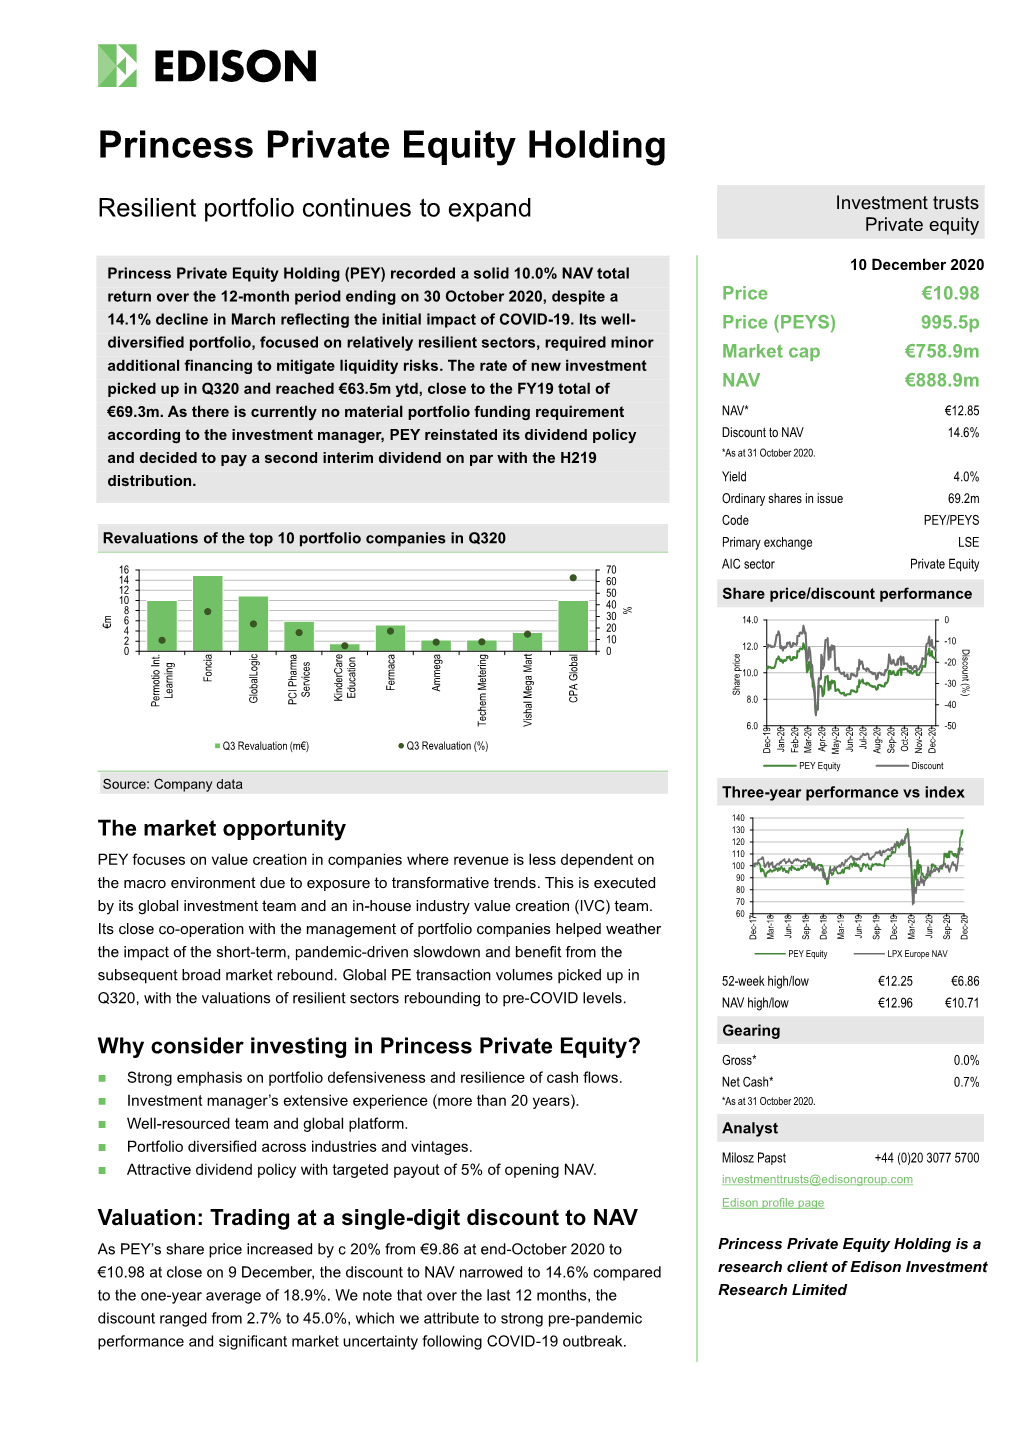 Princess-Private-Equity-Holding-Resilient-Portfolio-Continues-To-Expand.Pdf